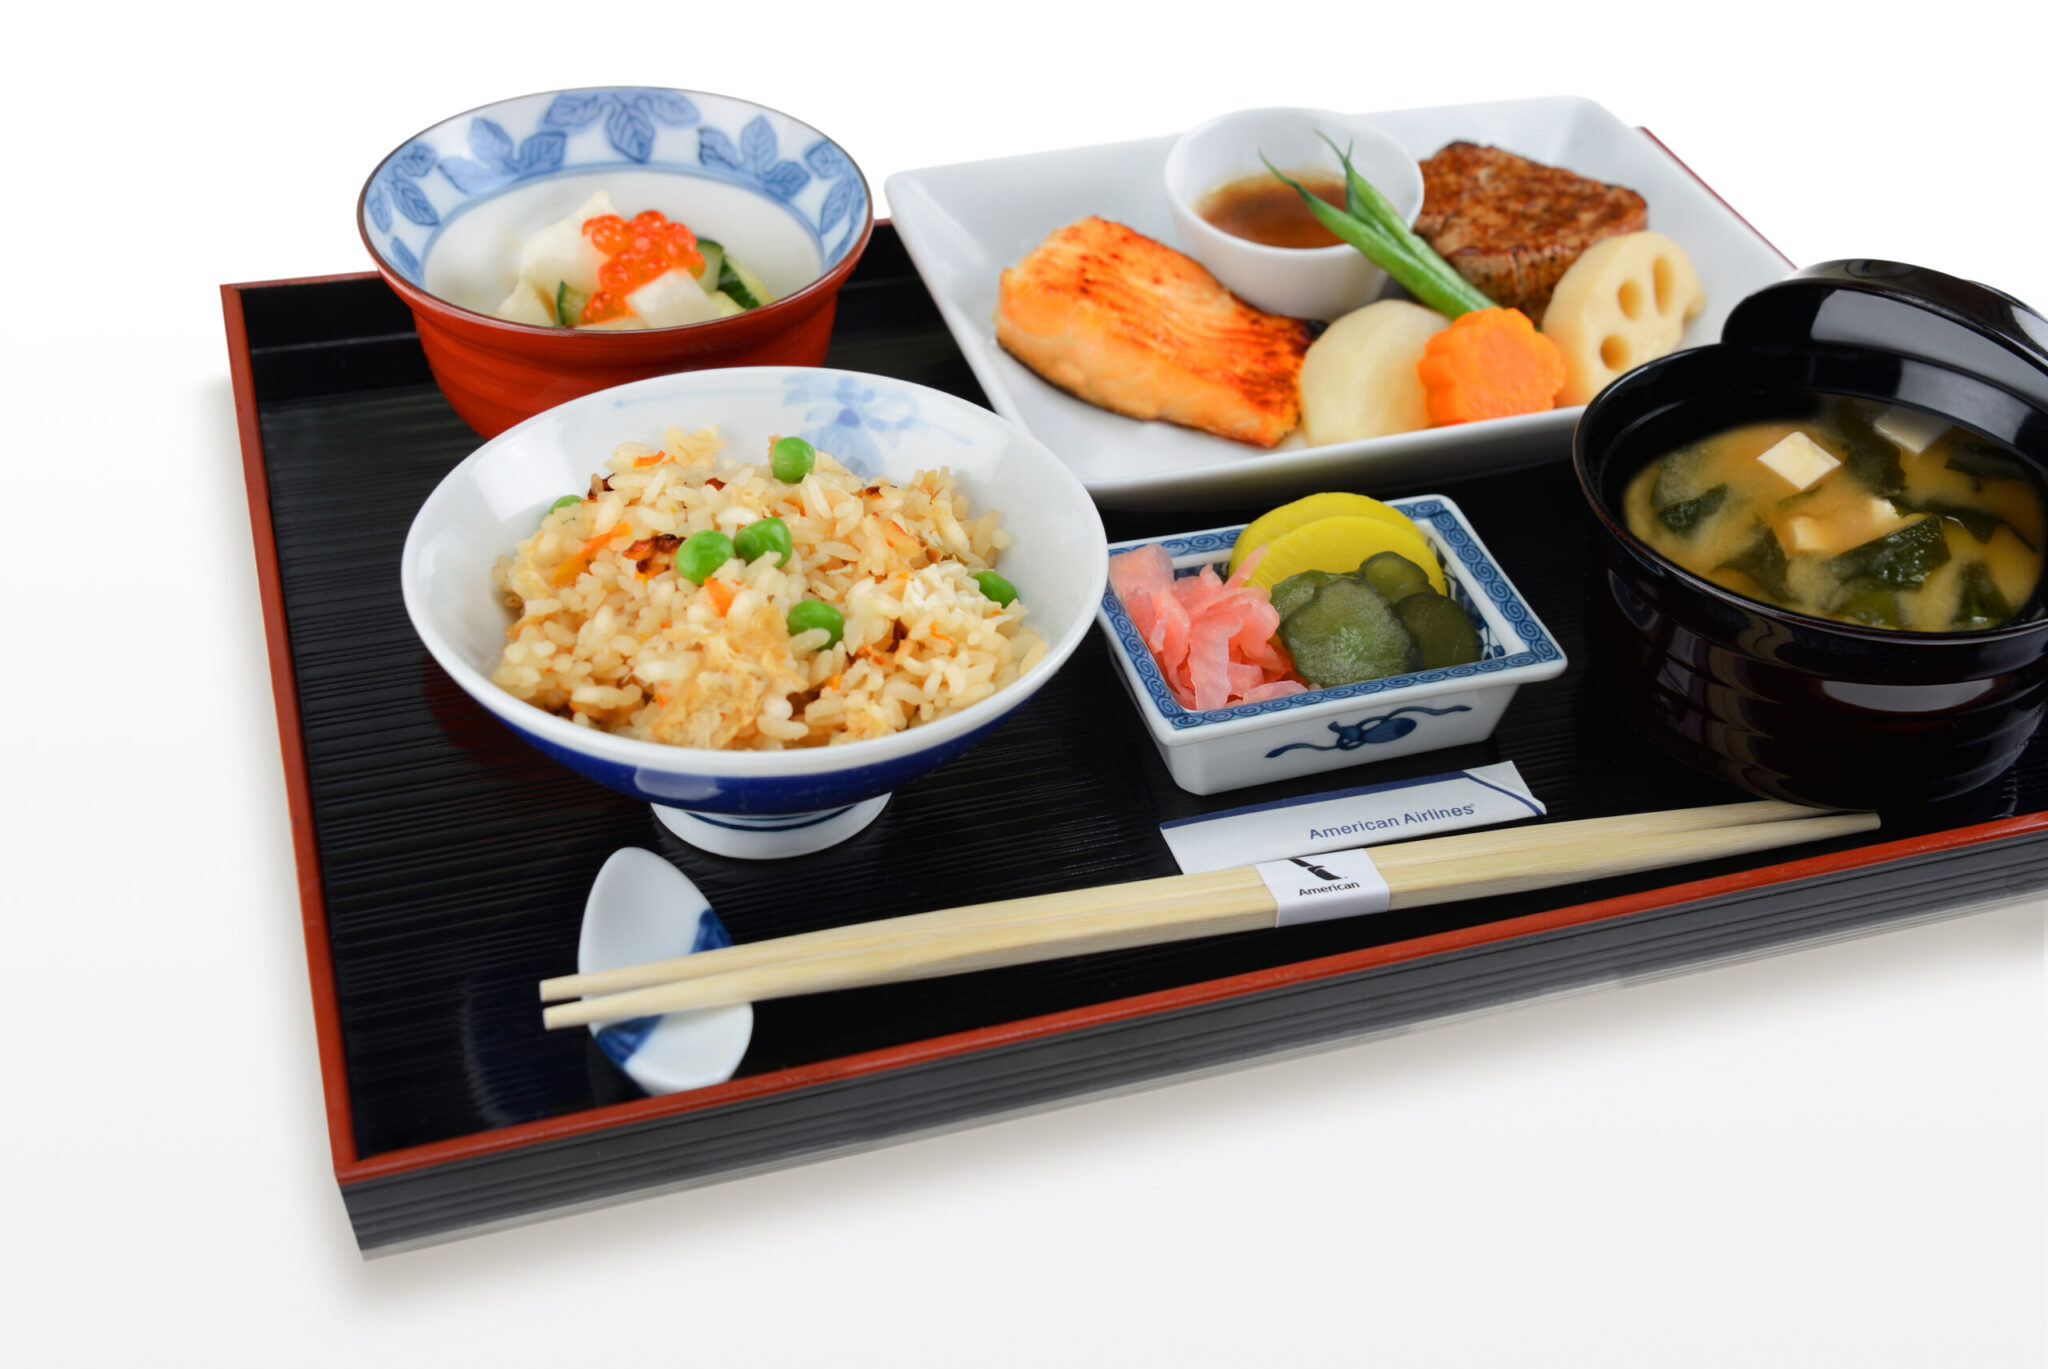 American Airlines Flagship First Asian Dinner Tray